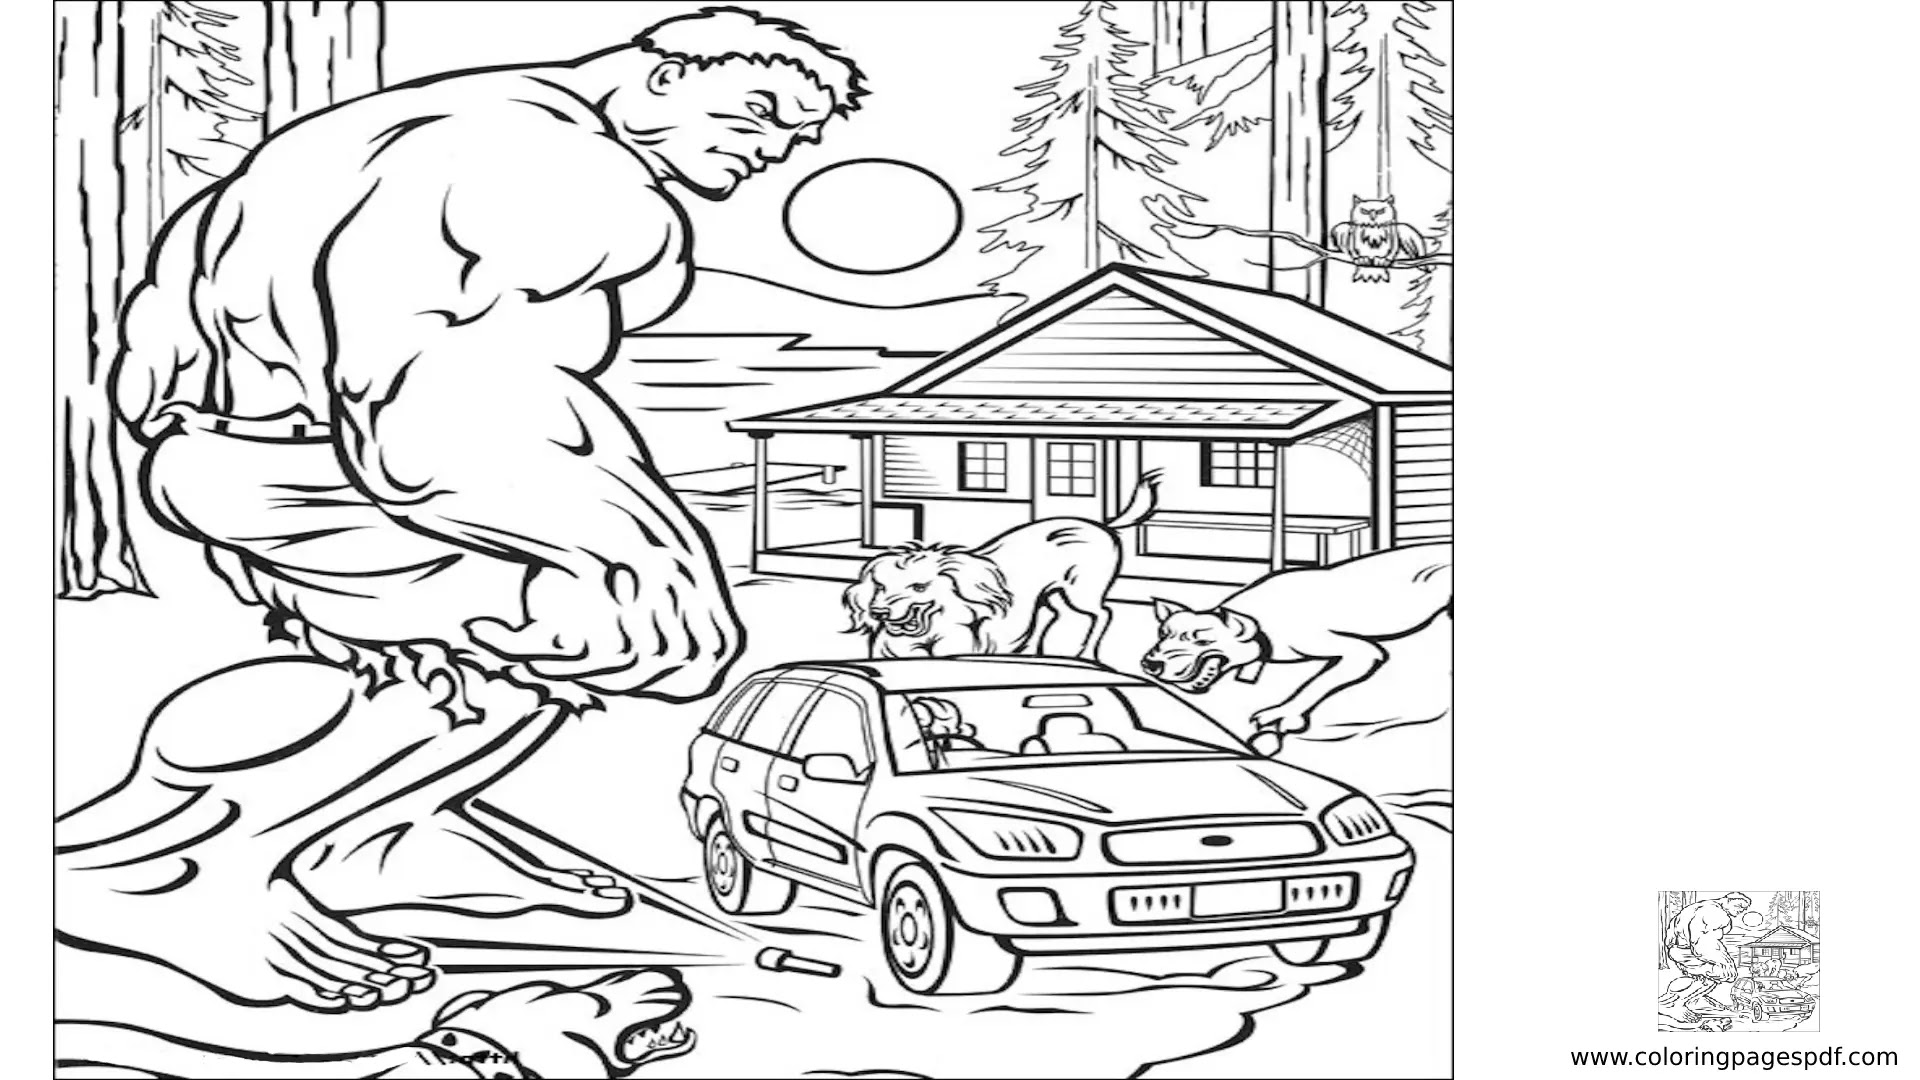 Coloring Pages Of Hulk In A Cool Mood